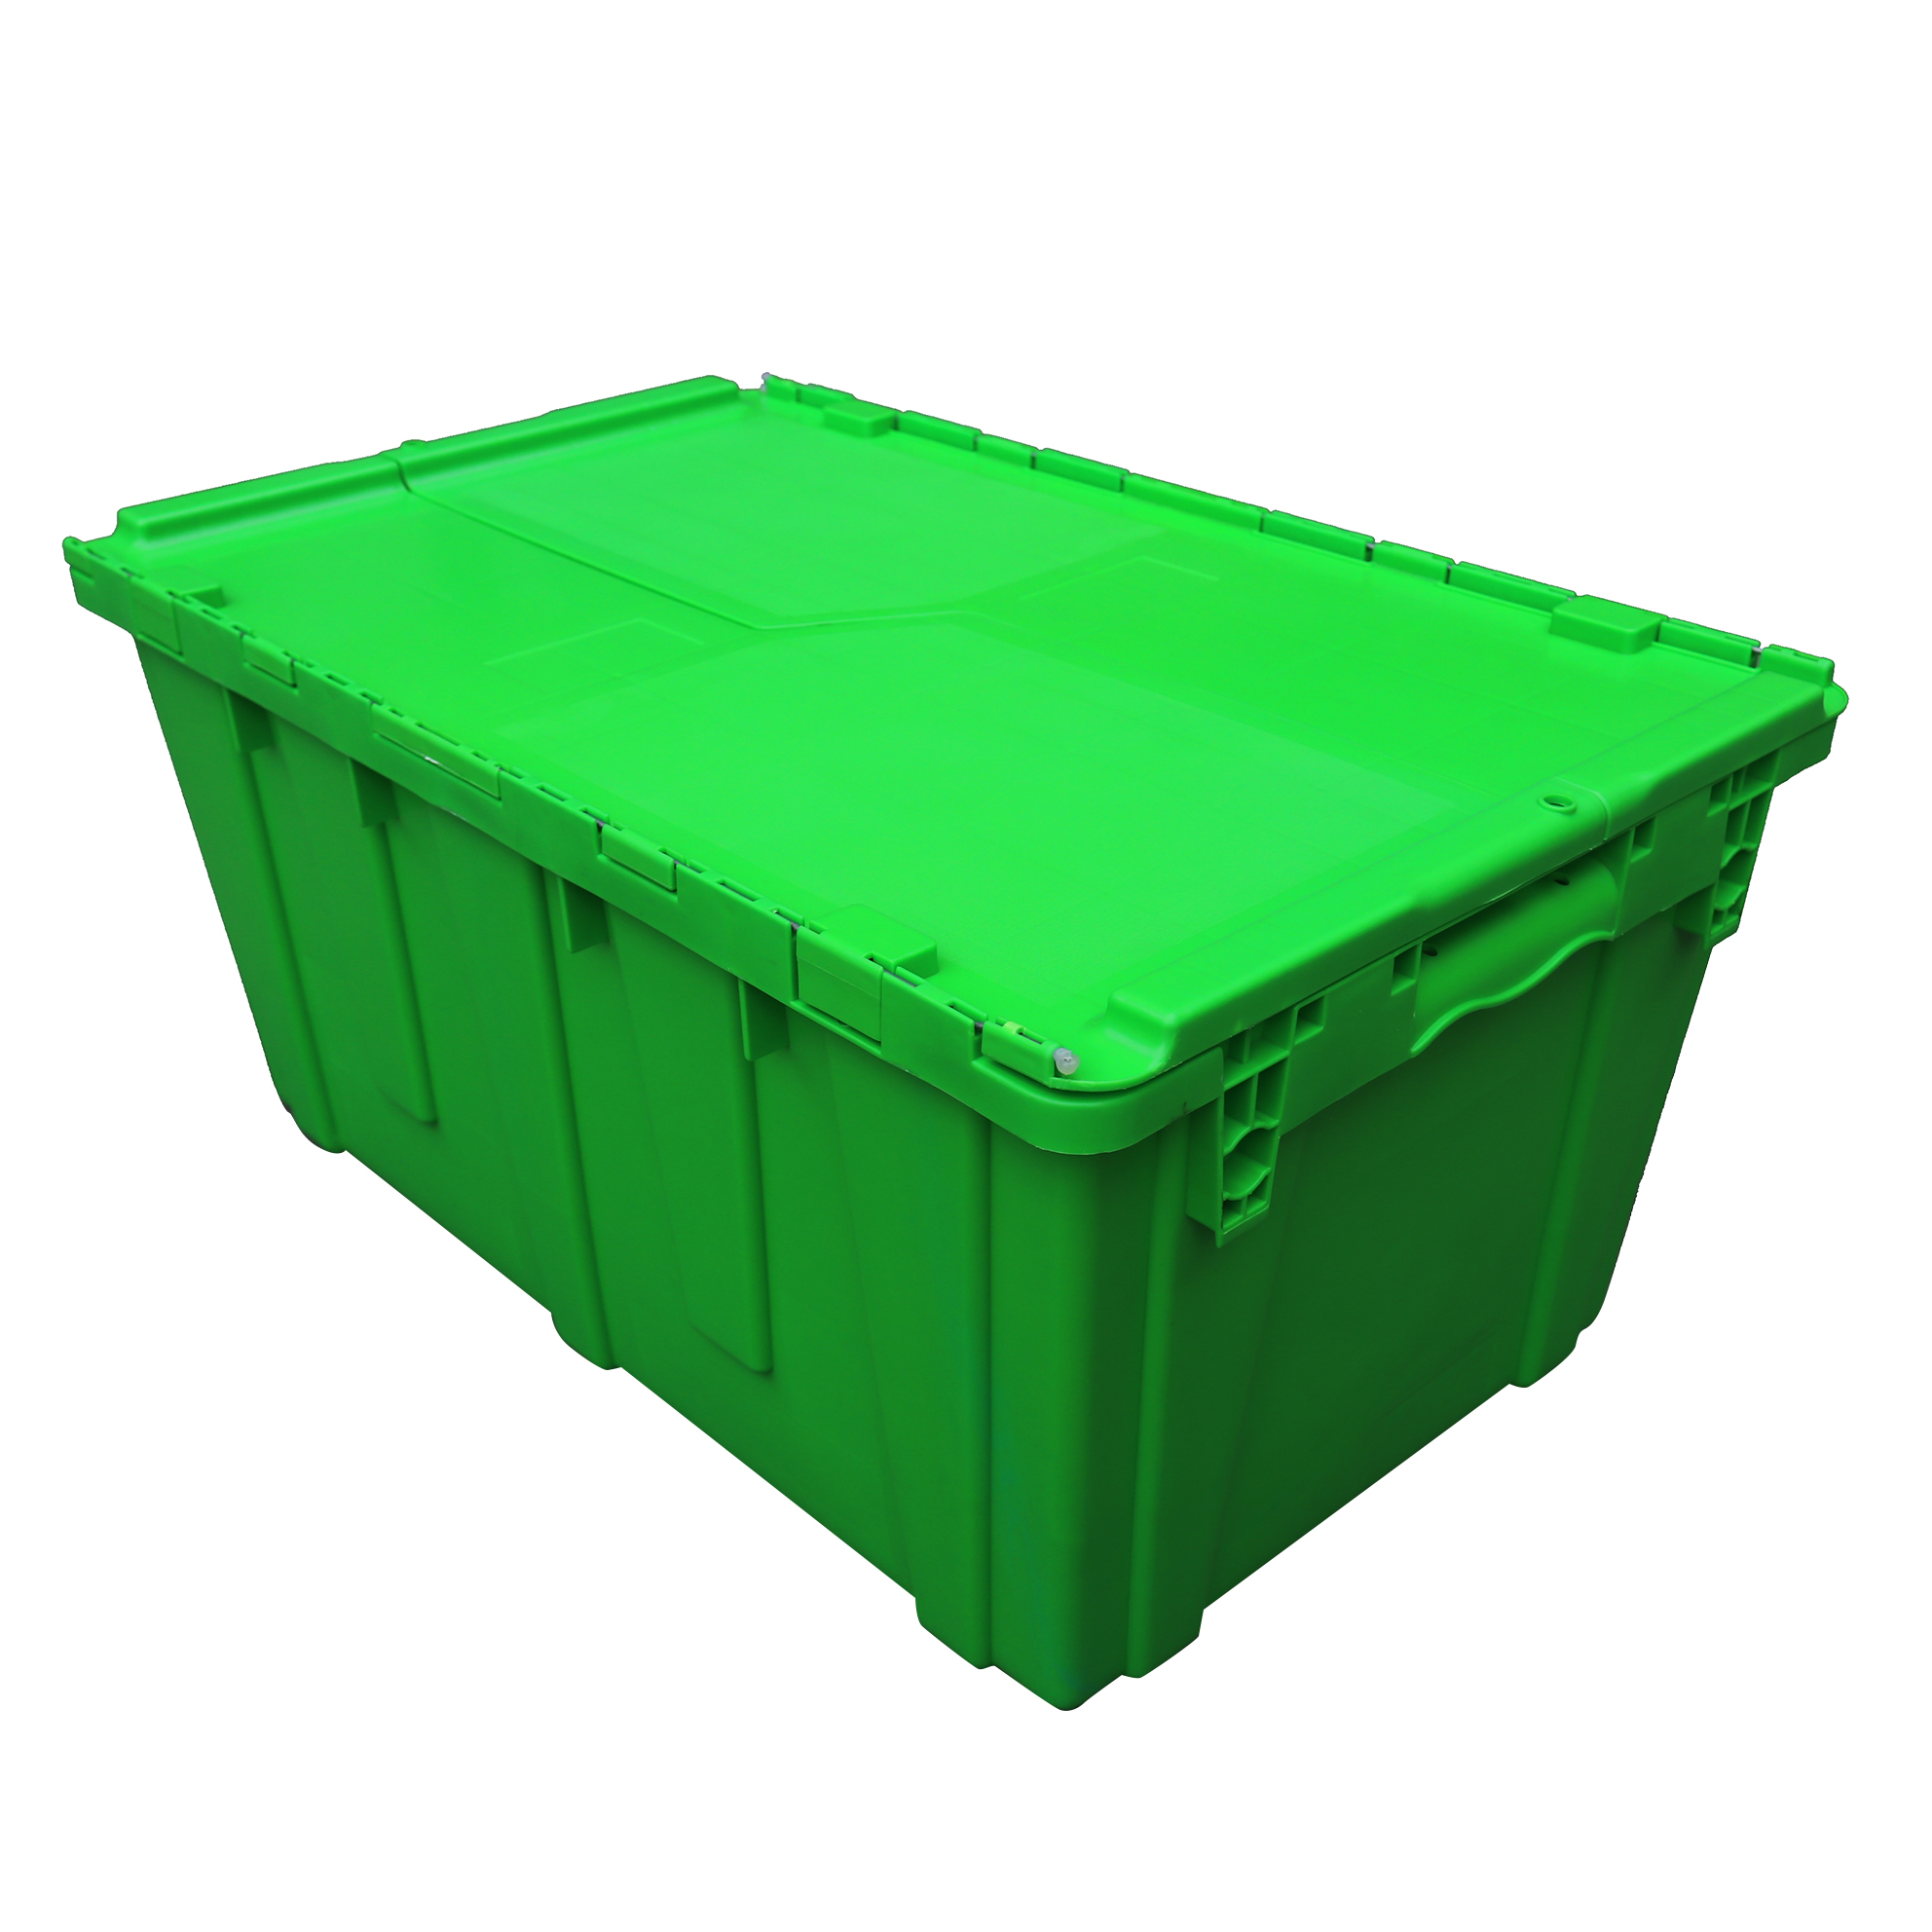 Plastic moving totes,Plastic moving bins, cheap Round trip totes wholesale